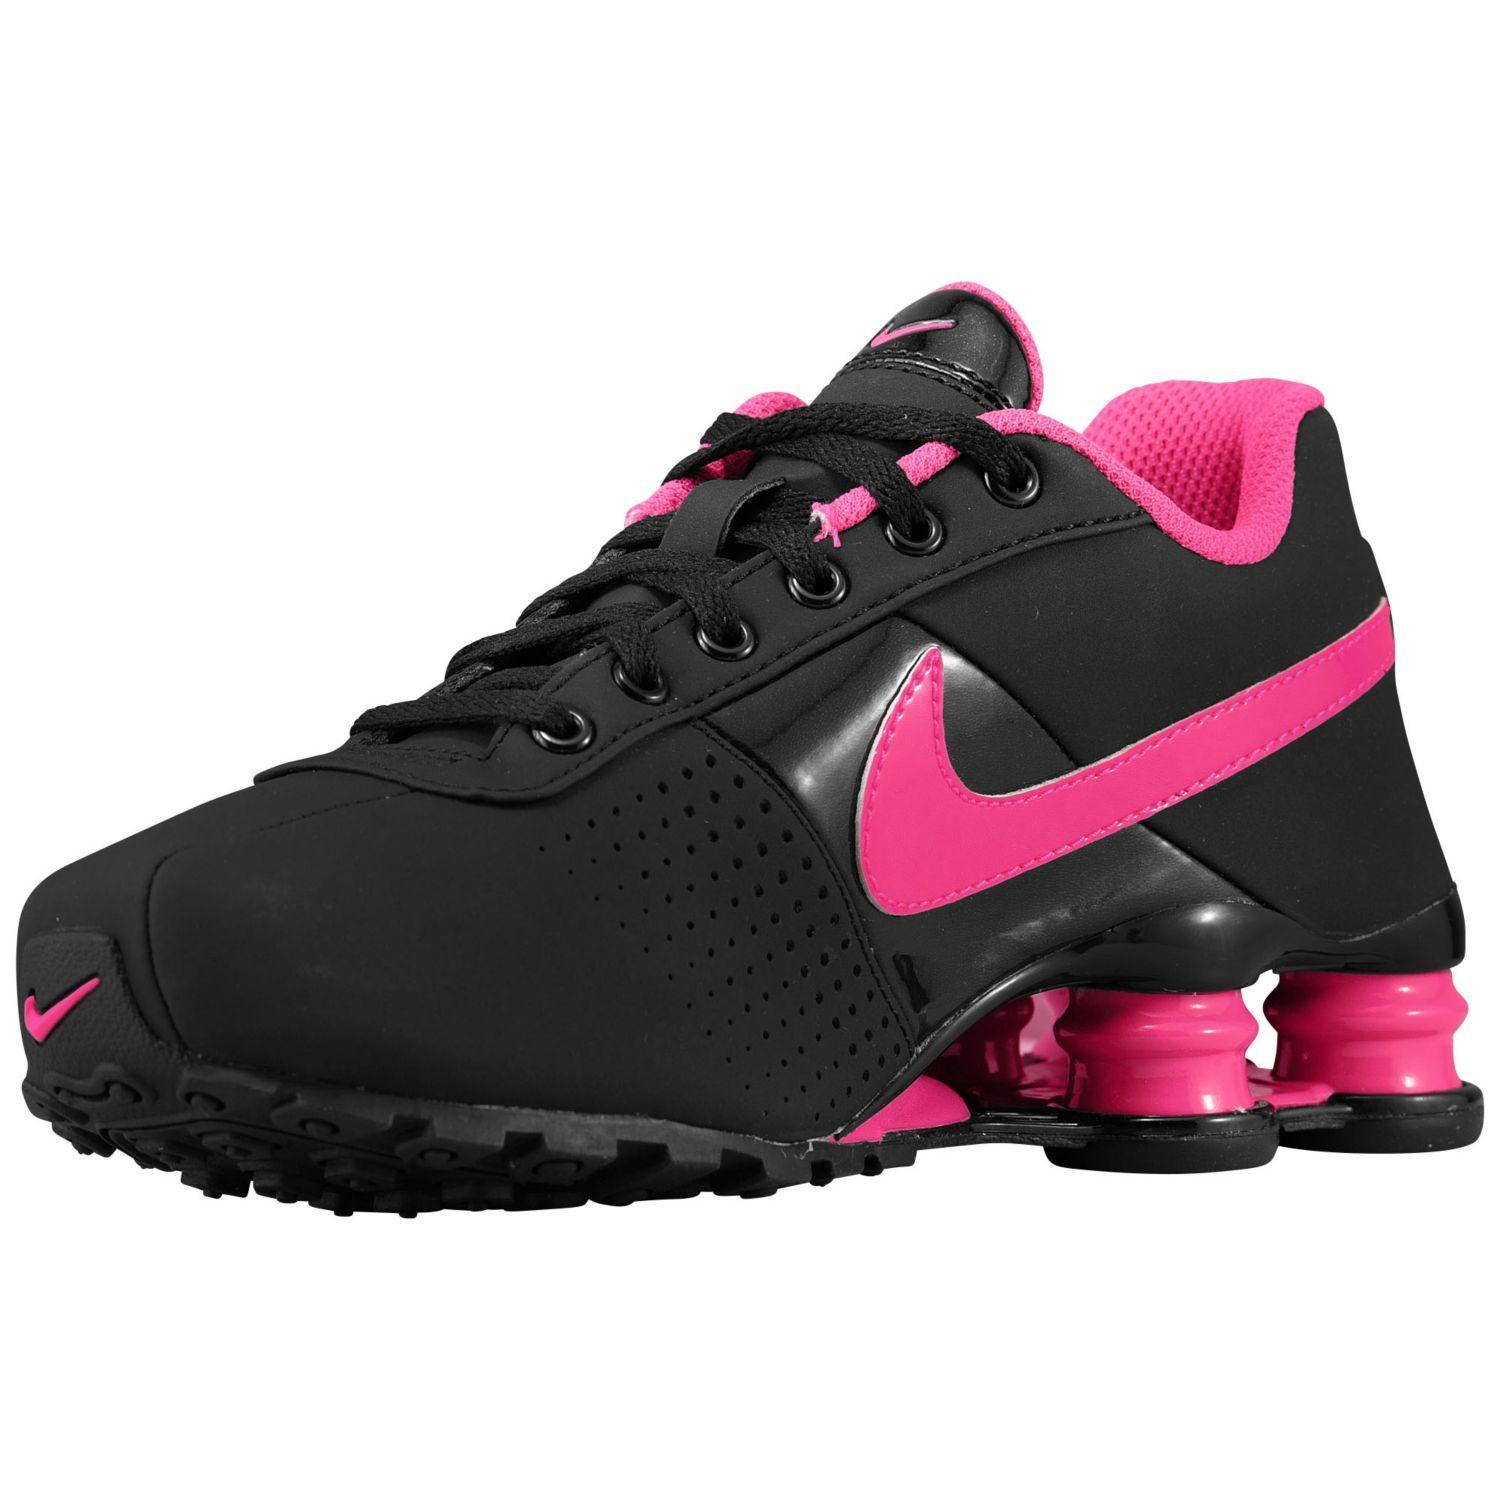 Pink and Black Nike Logo - Hot Pink Nike Shox Shoes | The Centre for Contemporary History